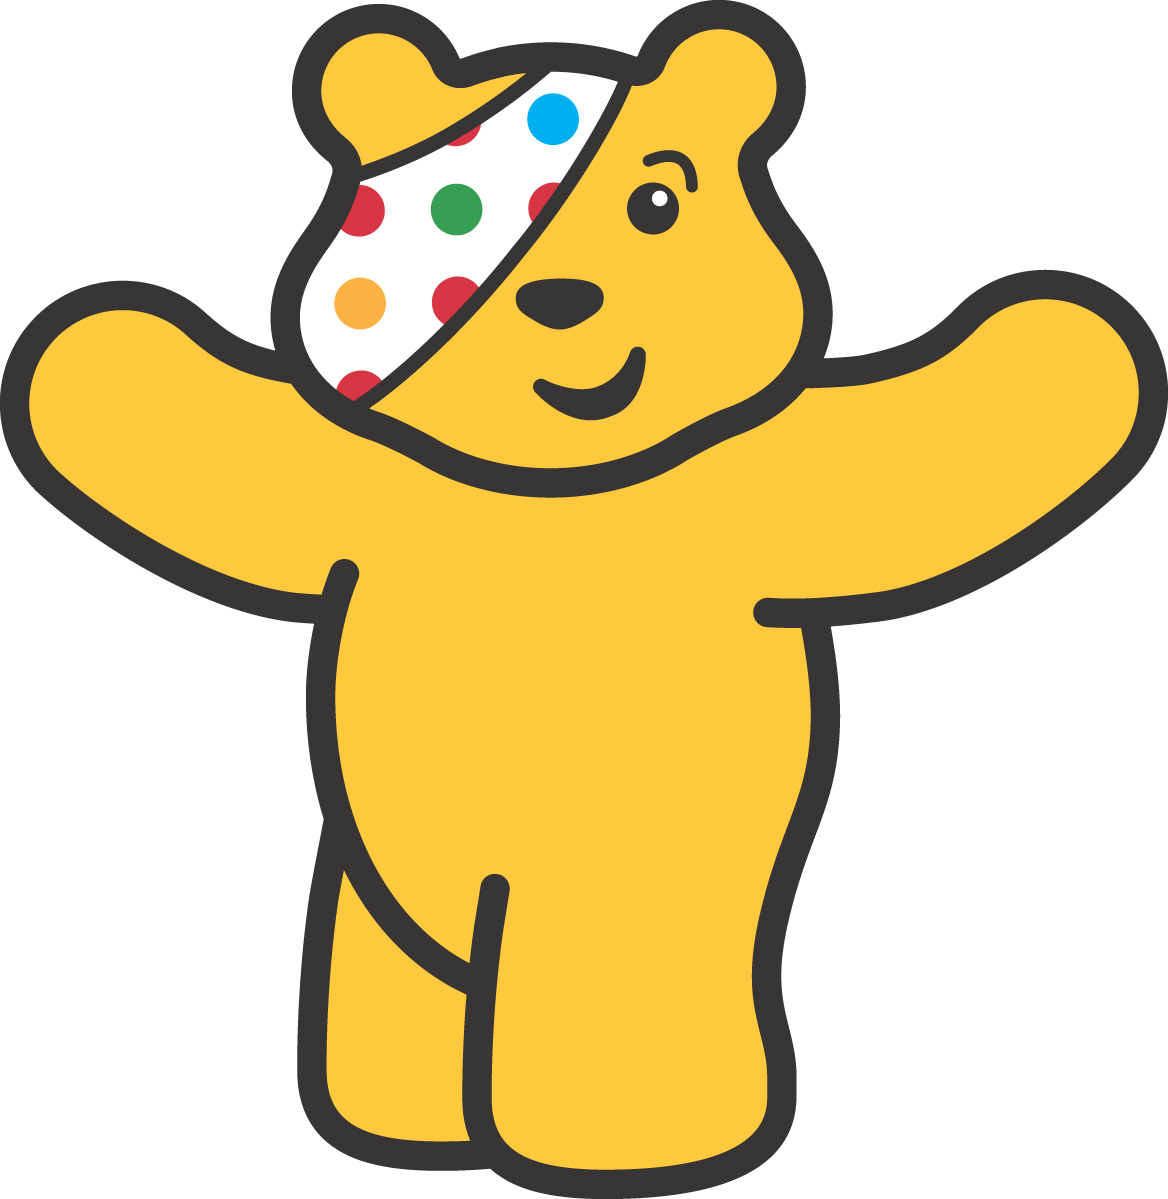 Children In Need mascot Pudsey Bear was unveiled as a smoker this week